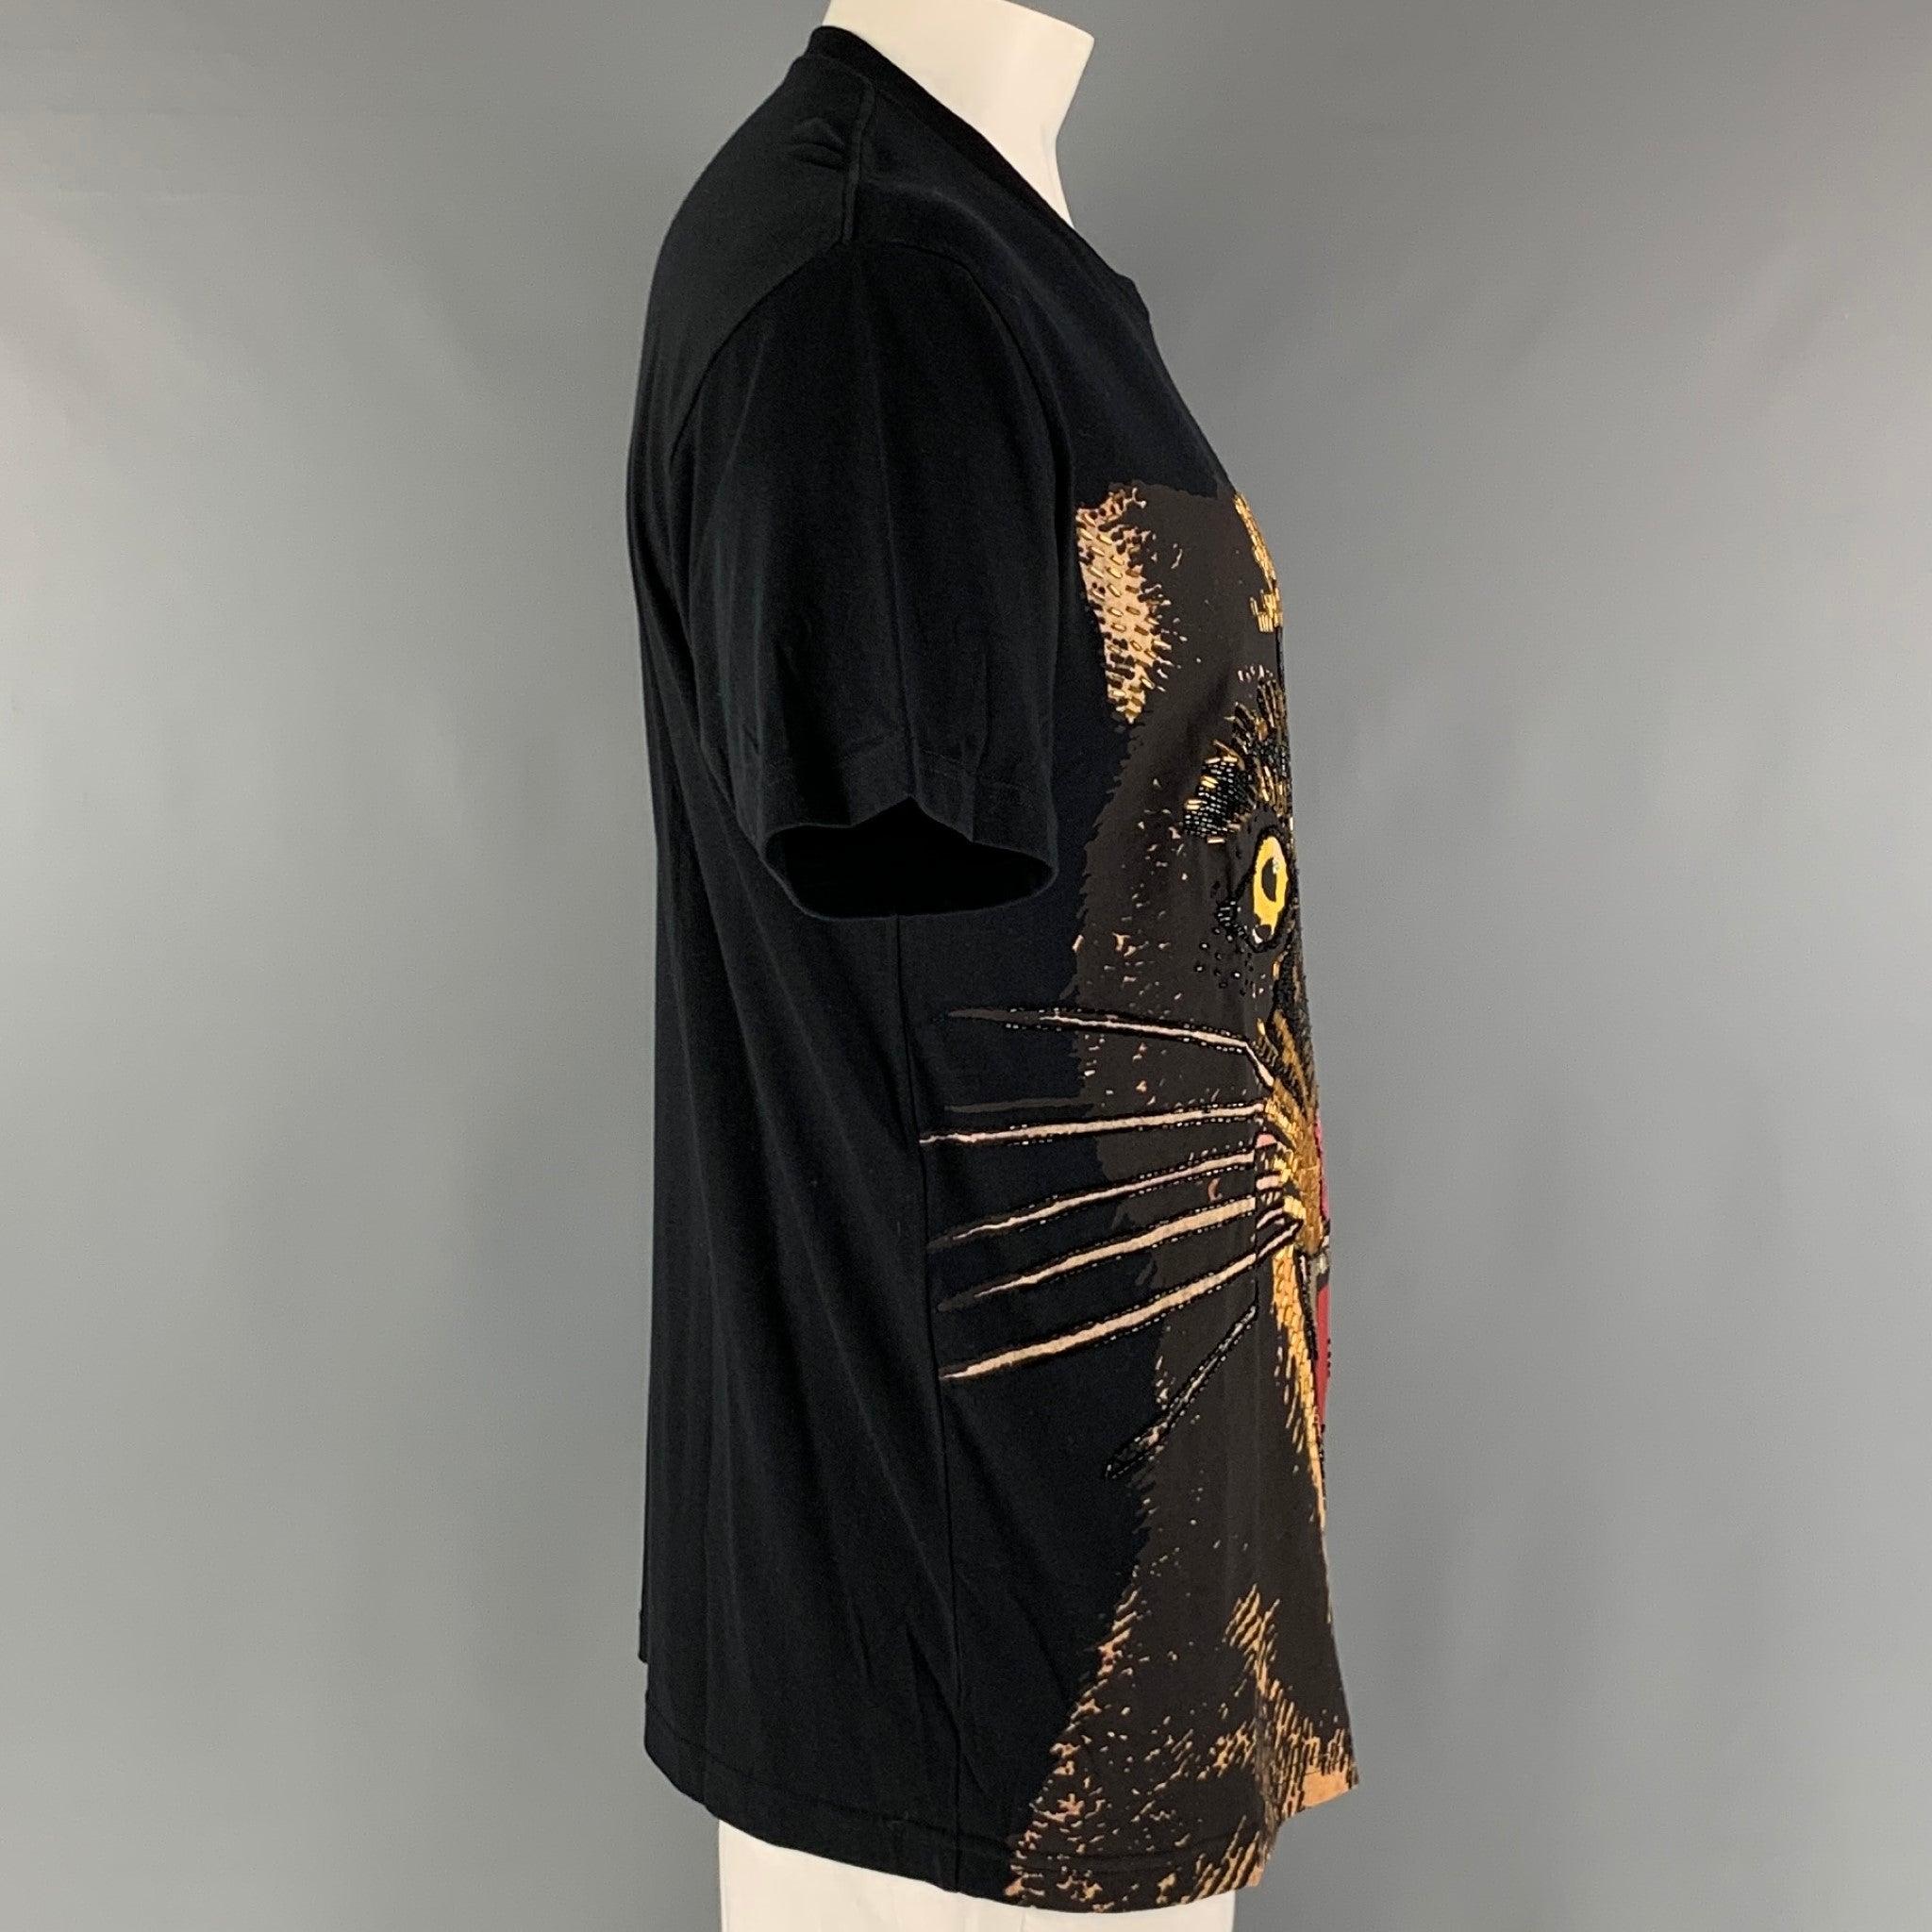 GUCCI F/W 2019 oversized t-shirt comes in a black jersey cotton knit material featuring a feline print with bead and sequin embroidery design at front and a crew-neck. Made in Italy.New with Tags. 

Marked:   S 

Measurements: 
 
Shoulder: 22 inches